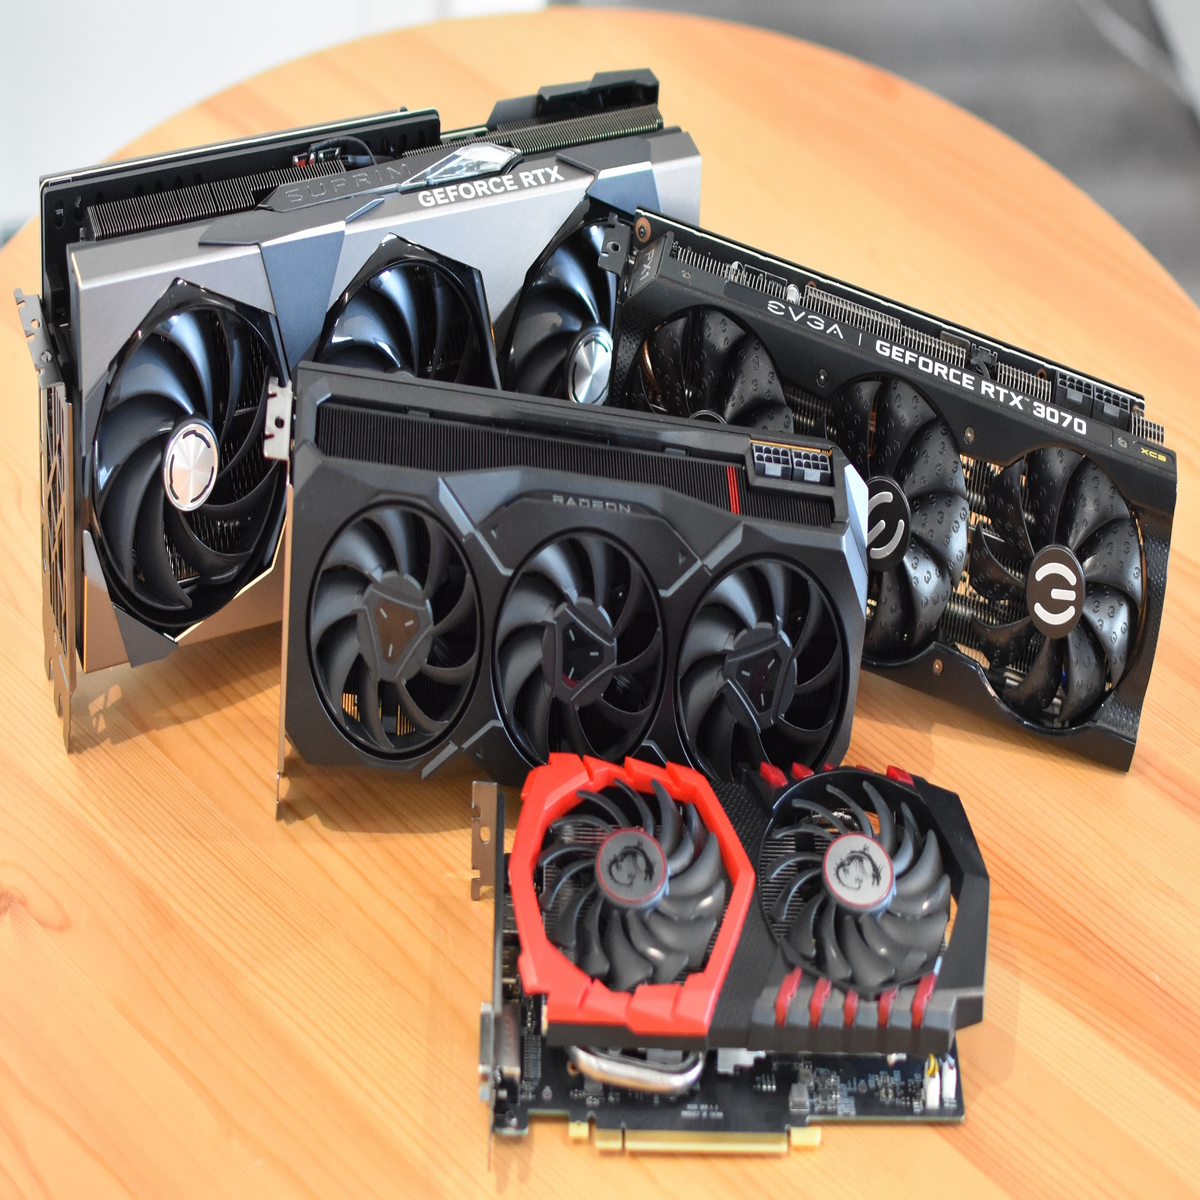 How Many Graphics Cards [GPUs] Can You Use In A PC Without Bottlenecking?